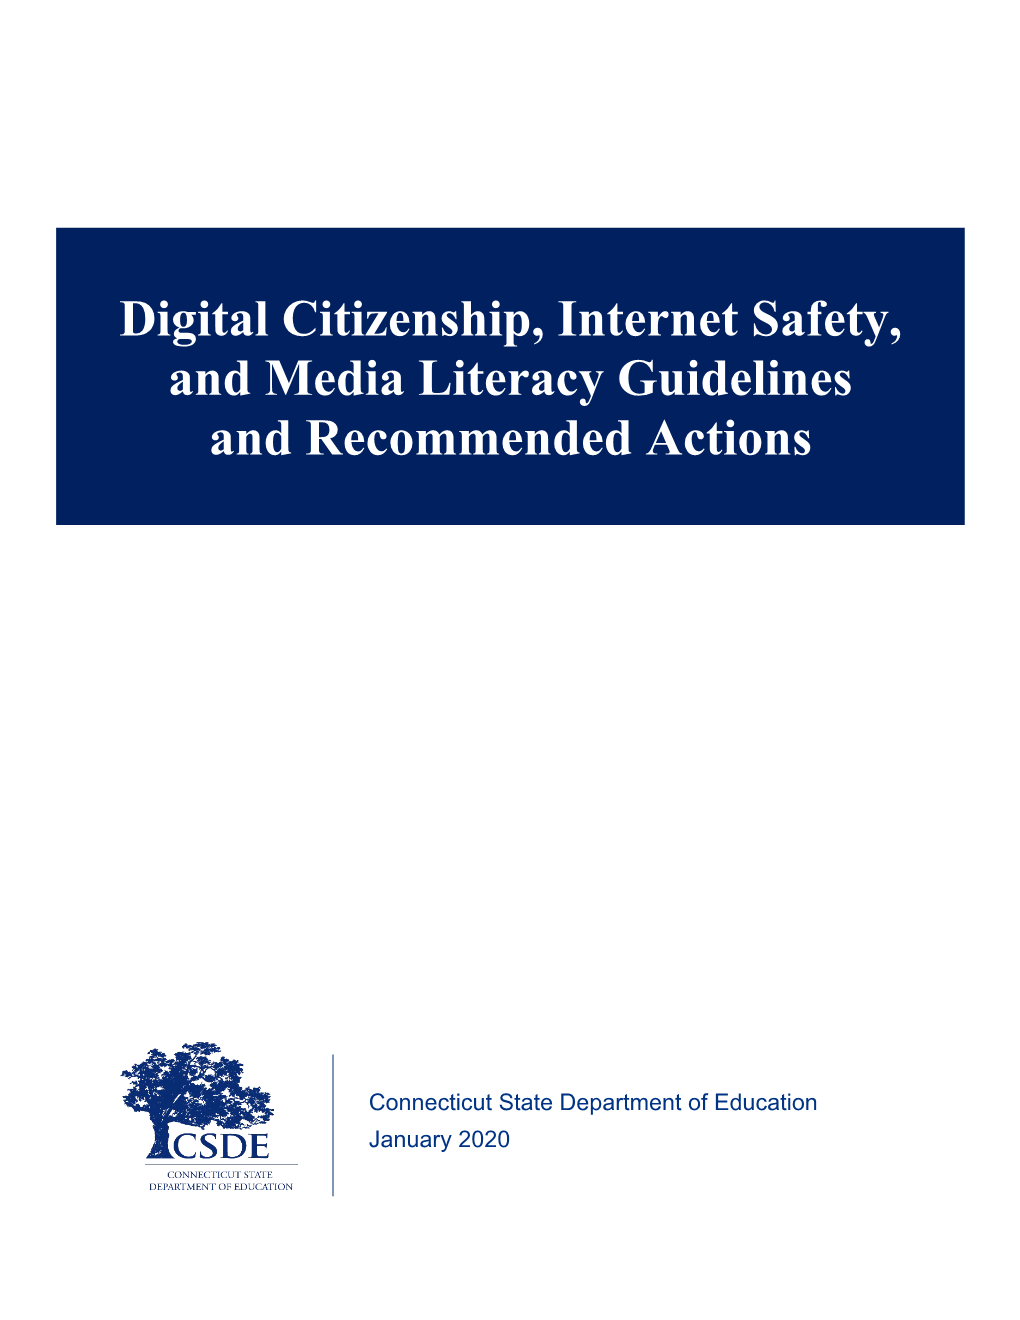 Digital Citizenship, Internet Safety, and Media Literacy Guidelines and Recommended Actions